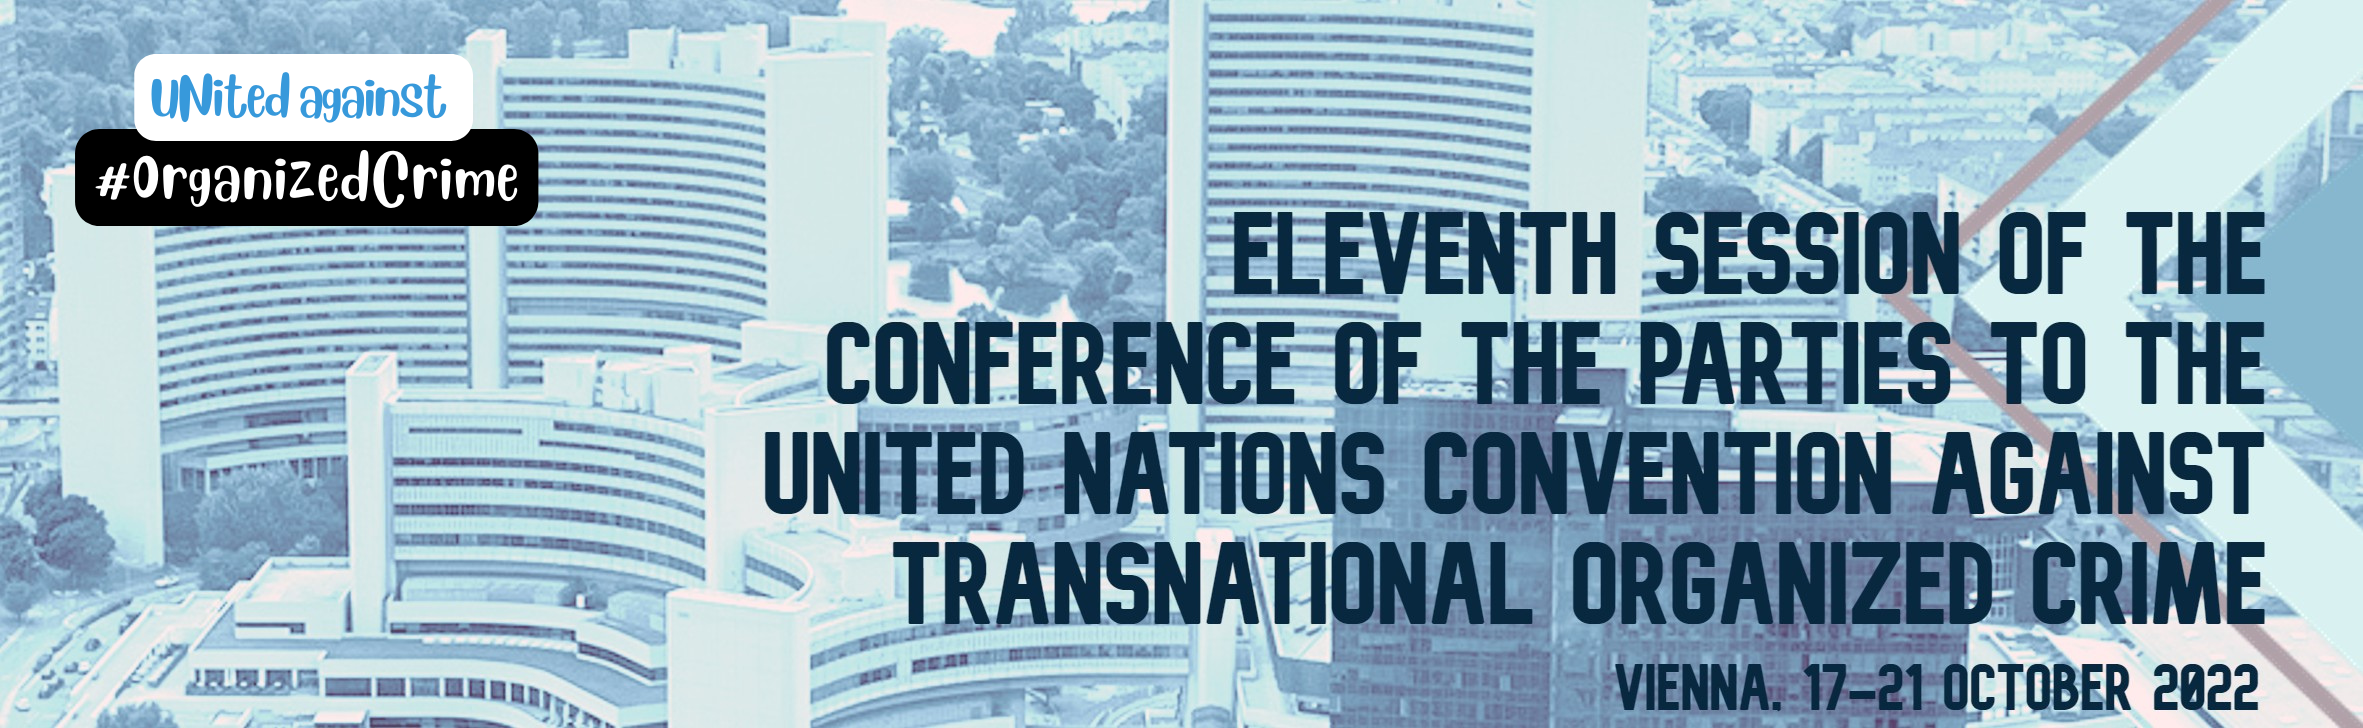 Eleventh Session of the Conference of the Parties to the UN Convention against Transnational Organised Crime